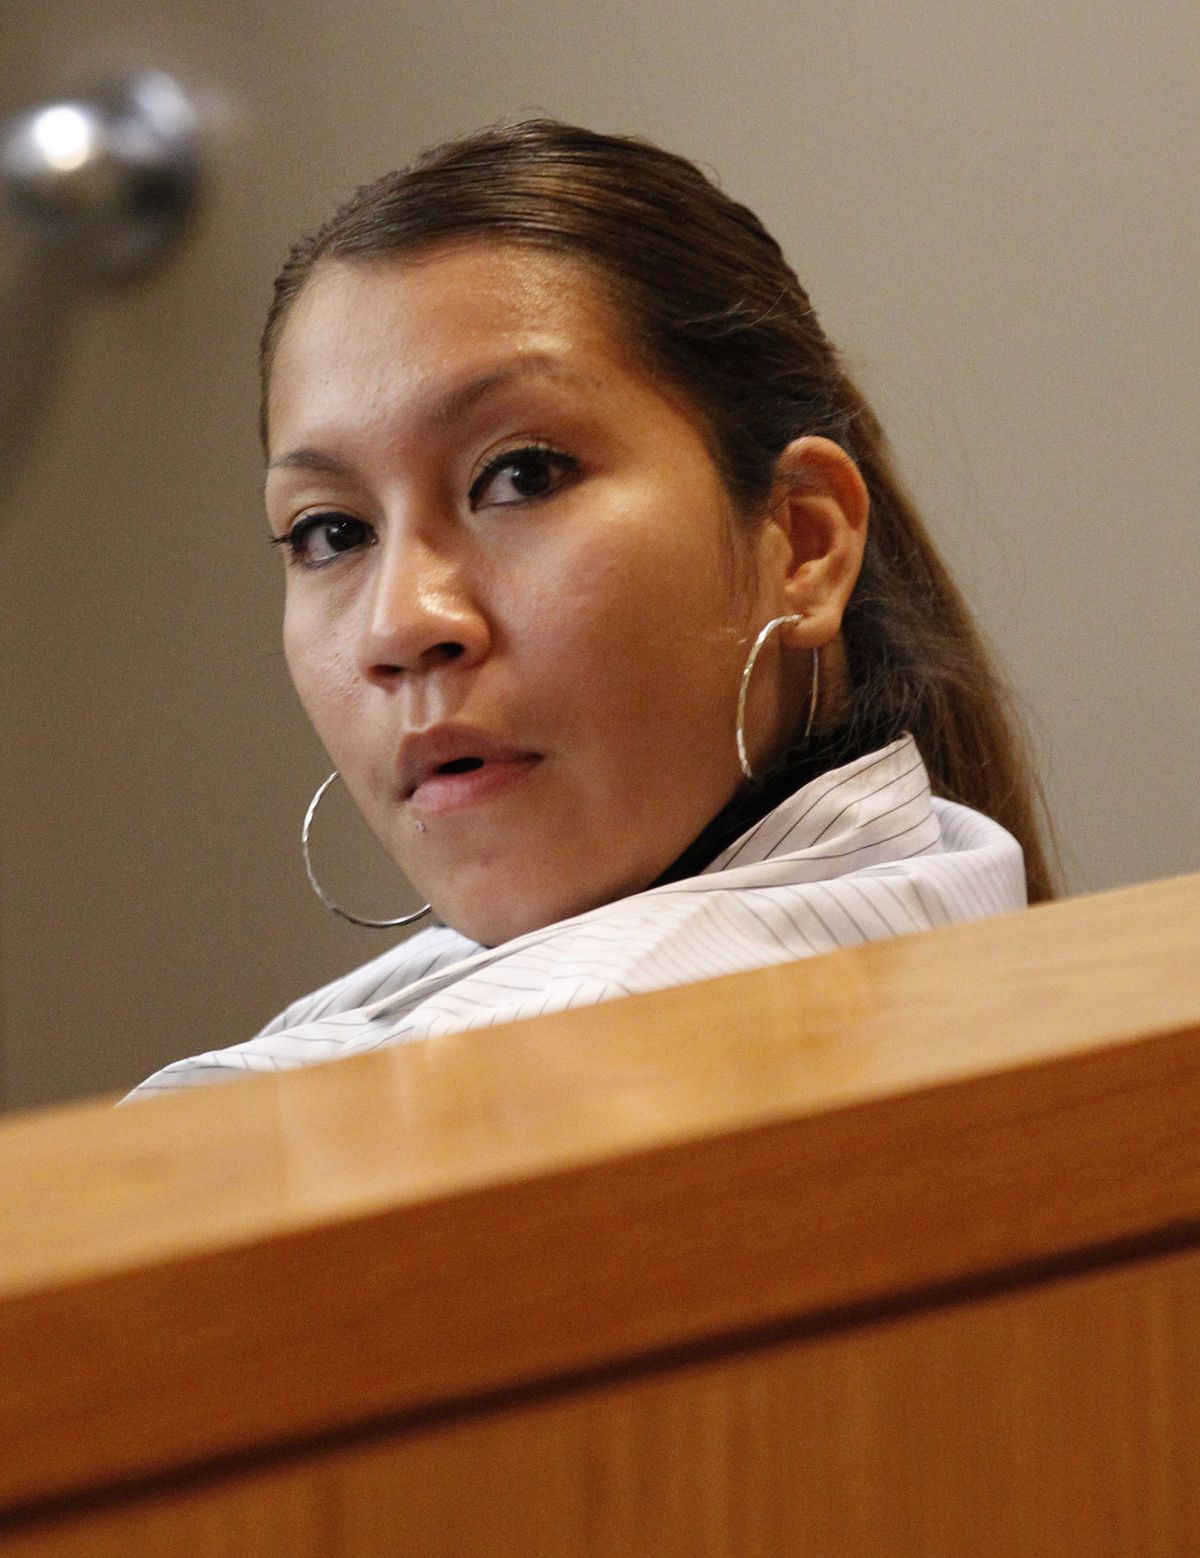 Elizabeth Escalona, 23, sits in a courtroom to be sentenced, in Dallas, Monday, Oct. 8, 2012. Escalona pleaded guilty on July 12, 2012, to injury to a child and is facing up to life in prison.  A doctor has testified that the Texas mother glued her 2-year-old daughter